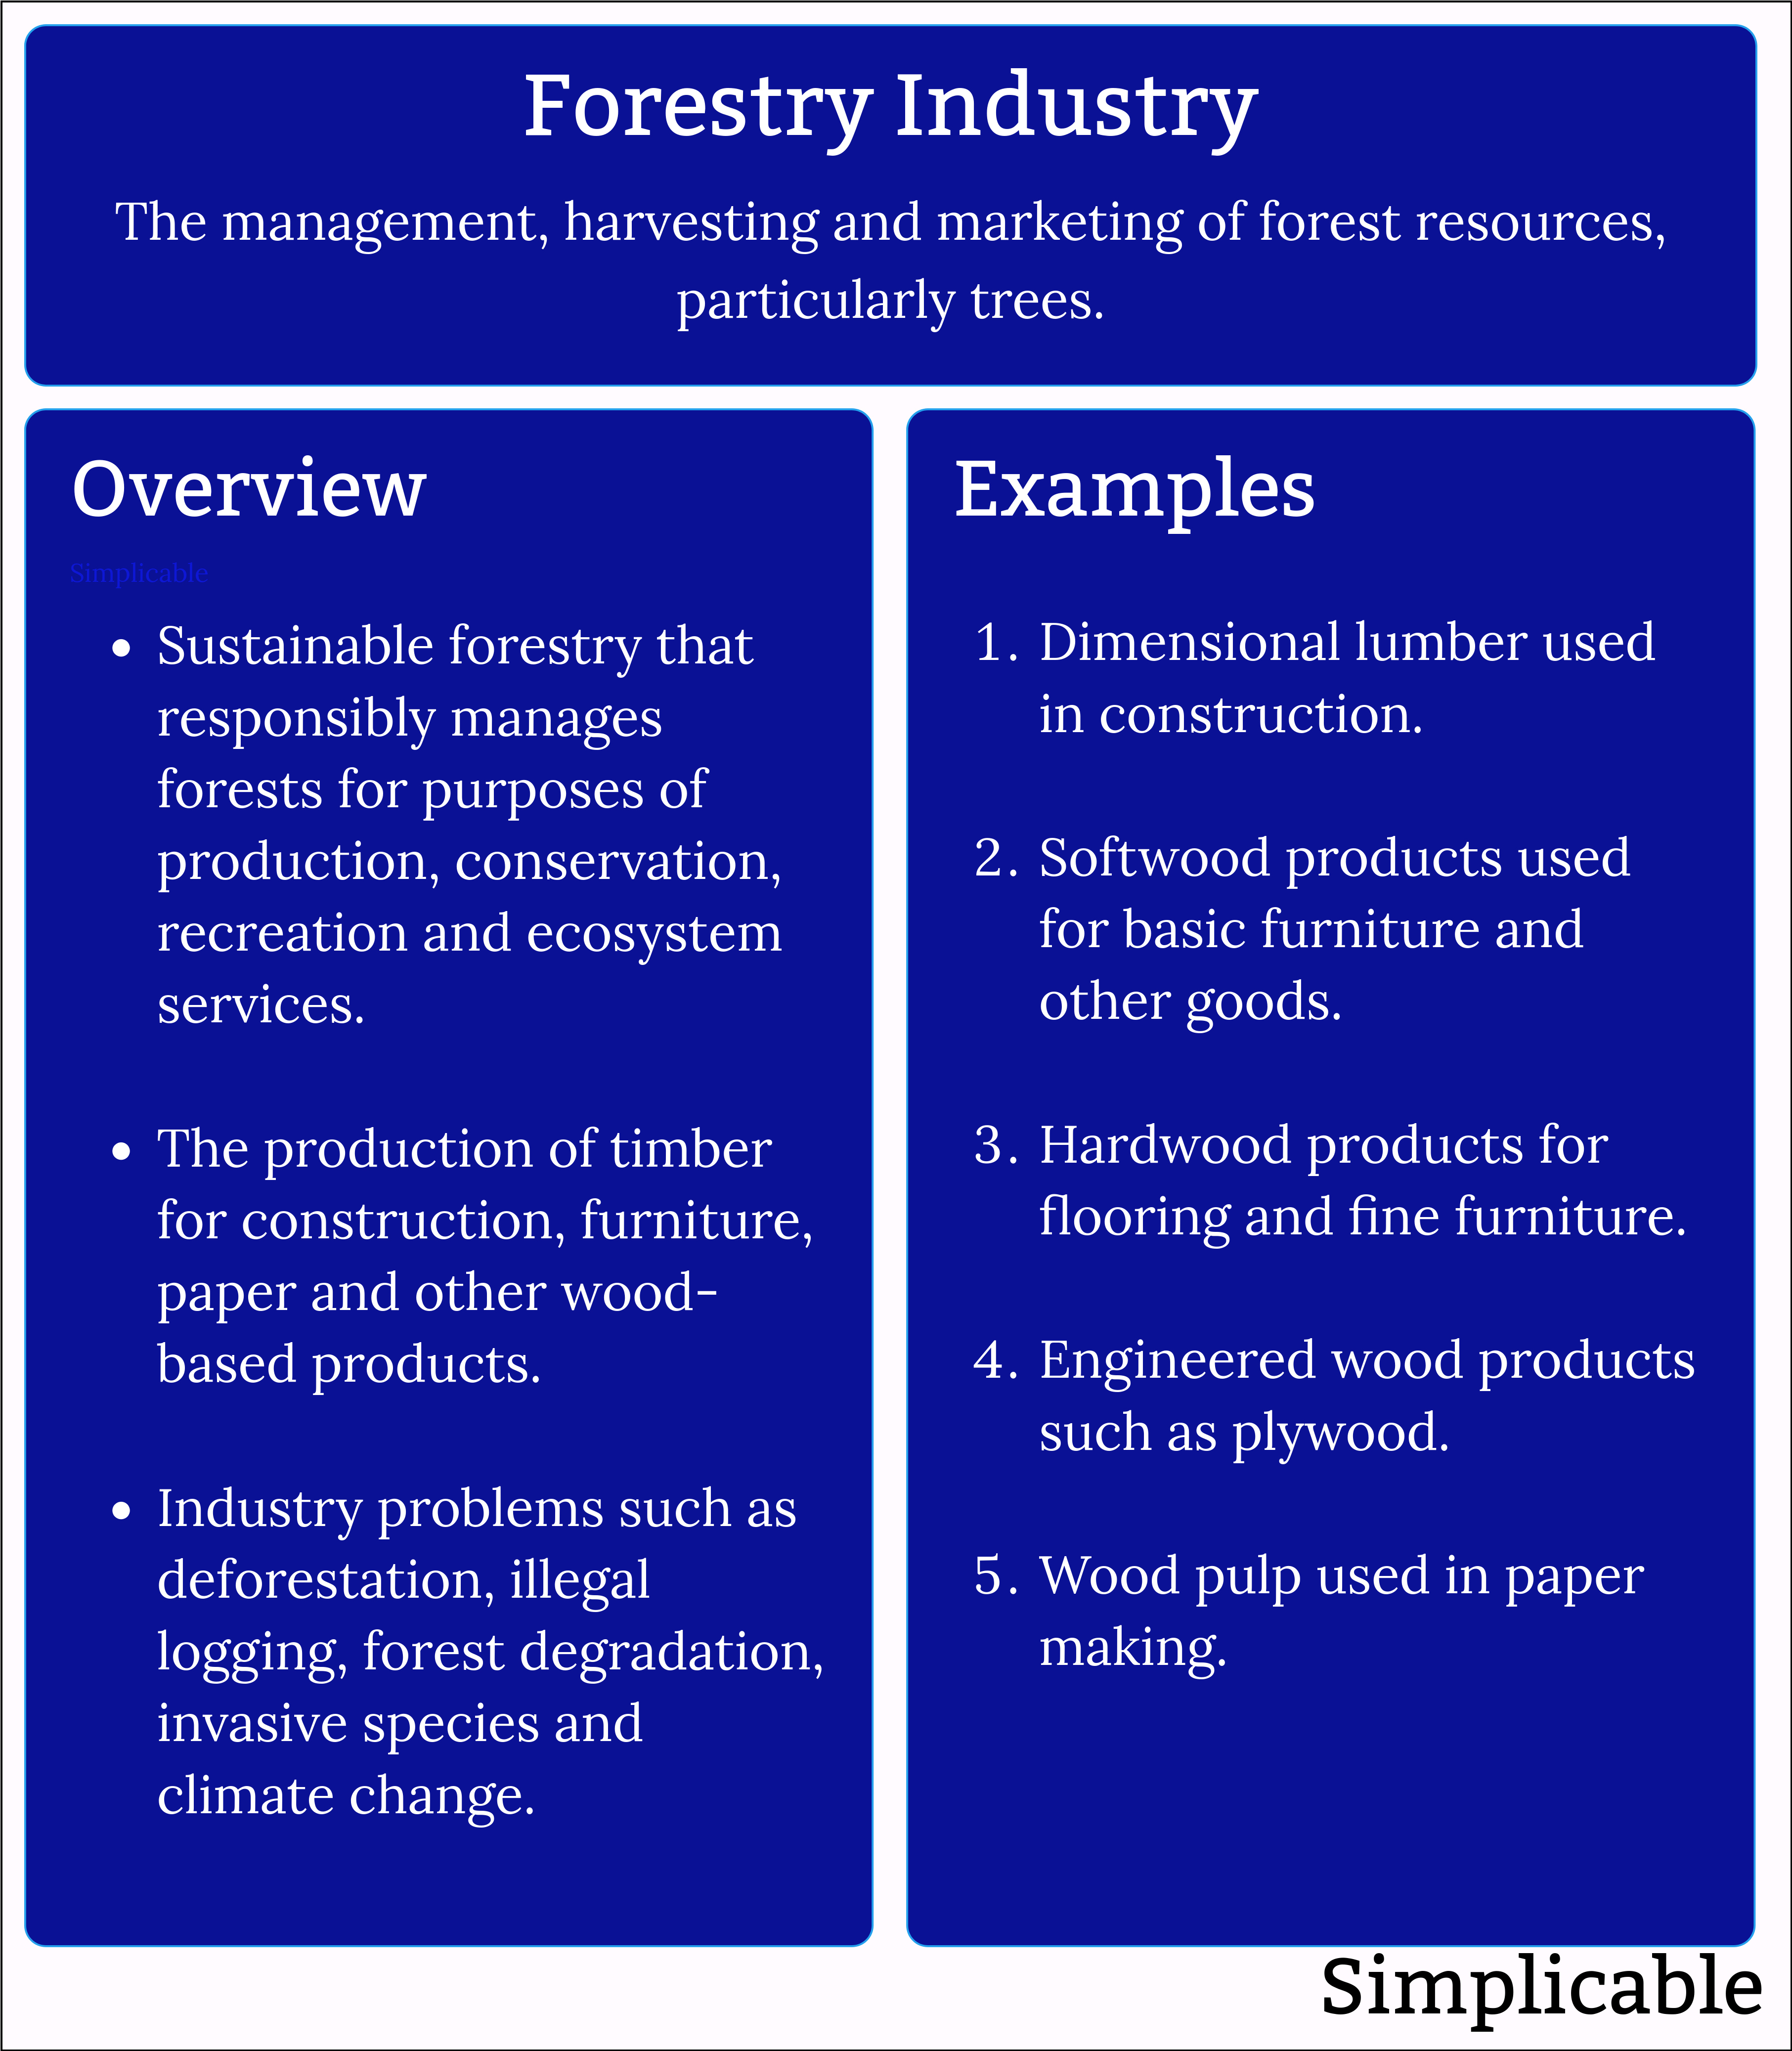 forestry industry overview and examples